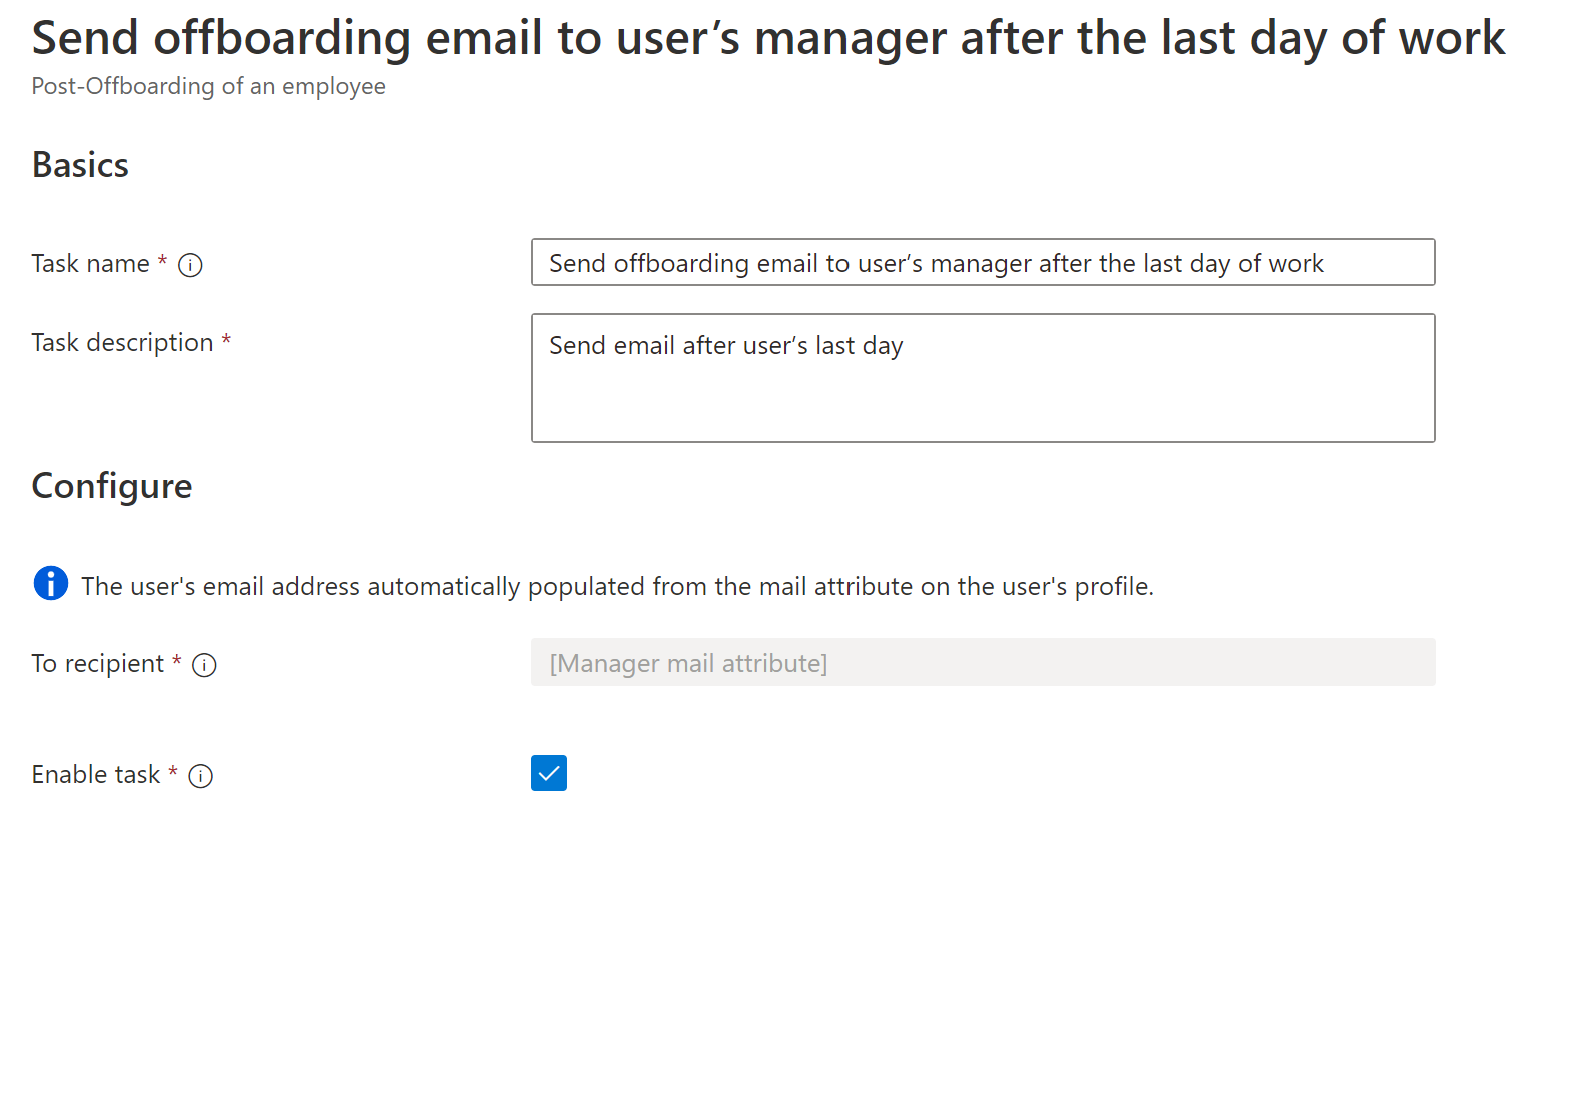 Screenshot of Workflows task: send offboarding email to users manager after their last day.